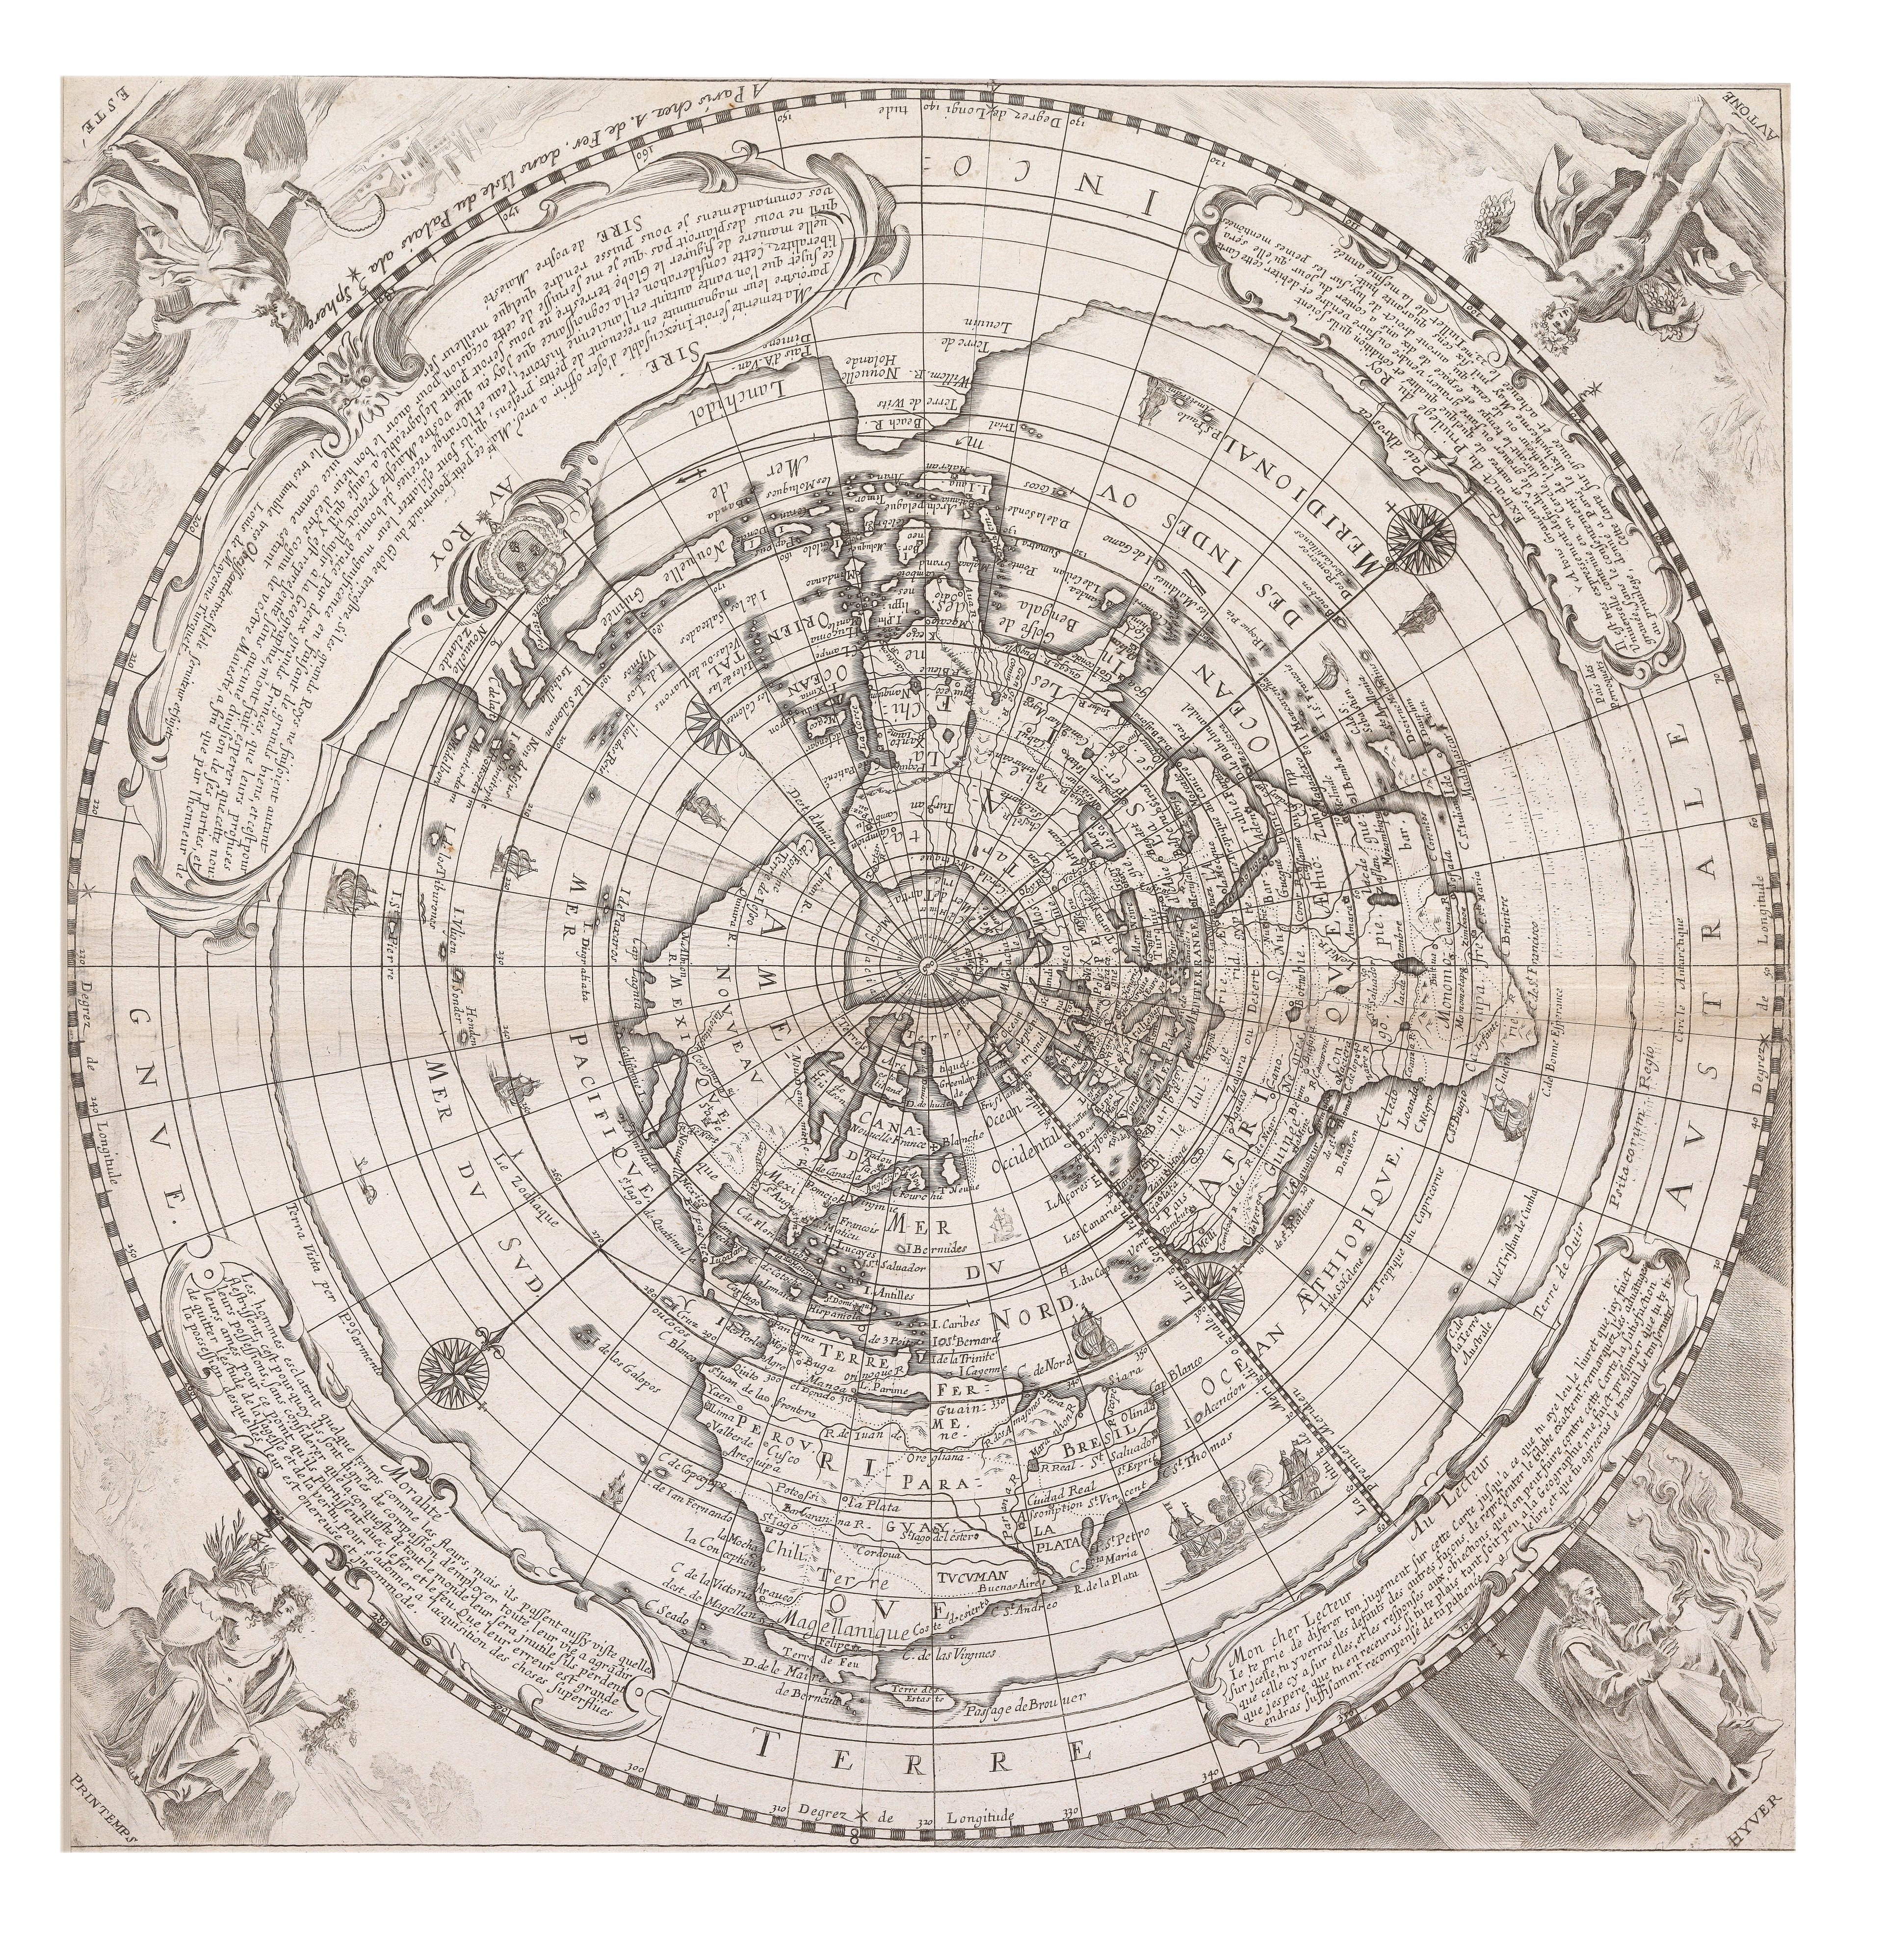 Map of the world on a north polar postel azimuthal projection with illustrations adorning each corner of the print